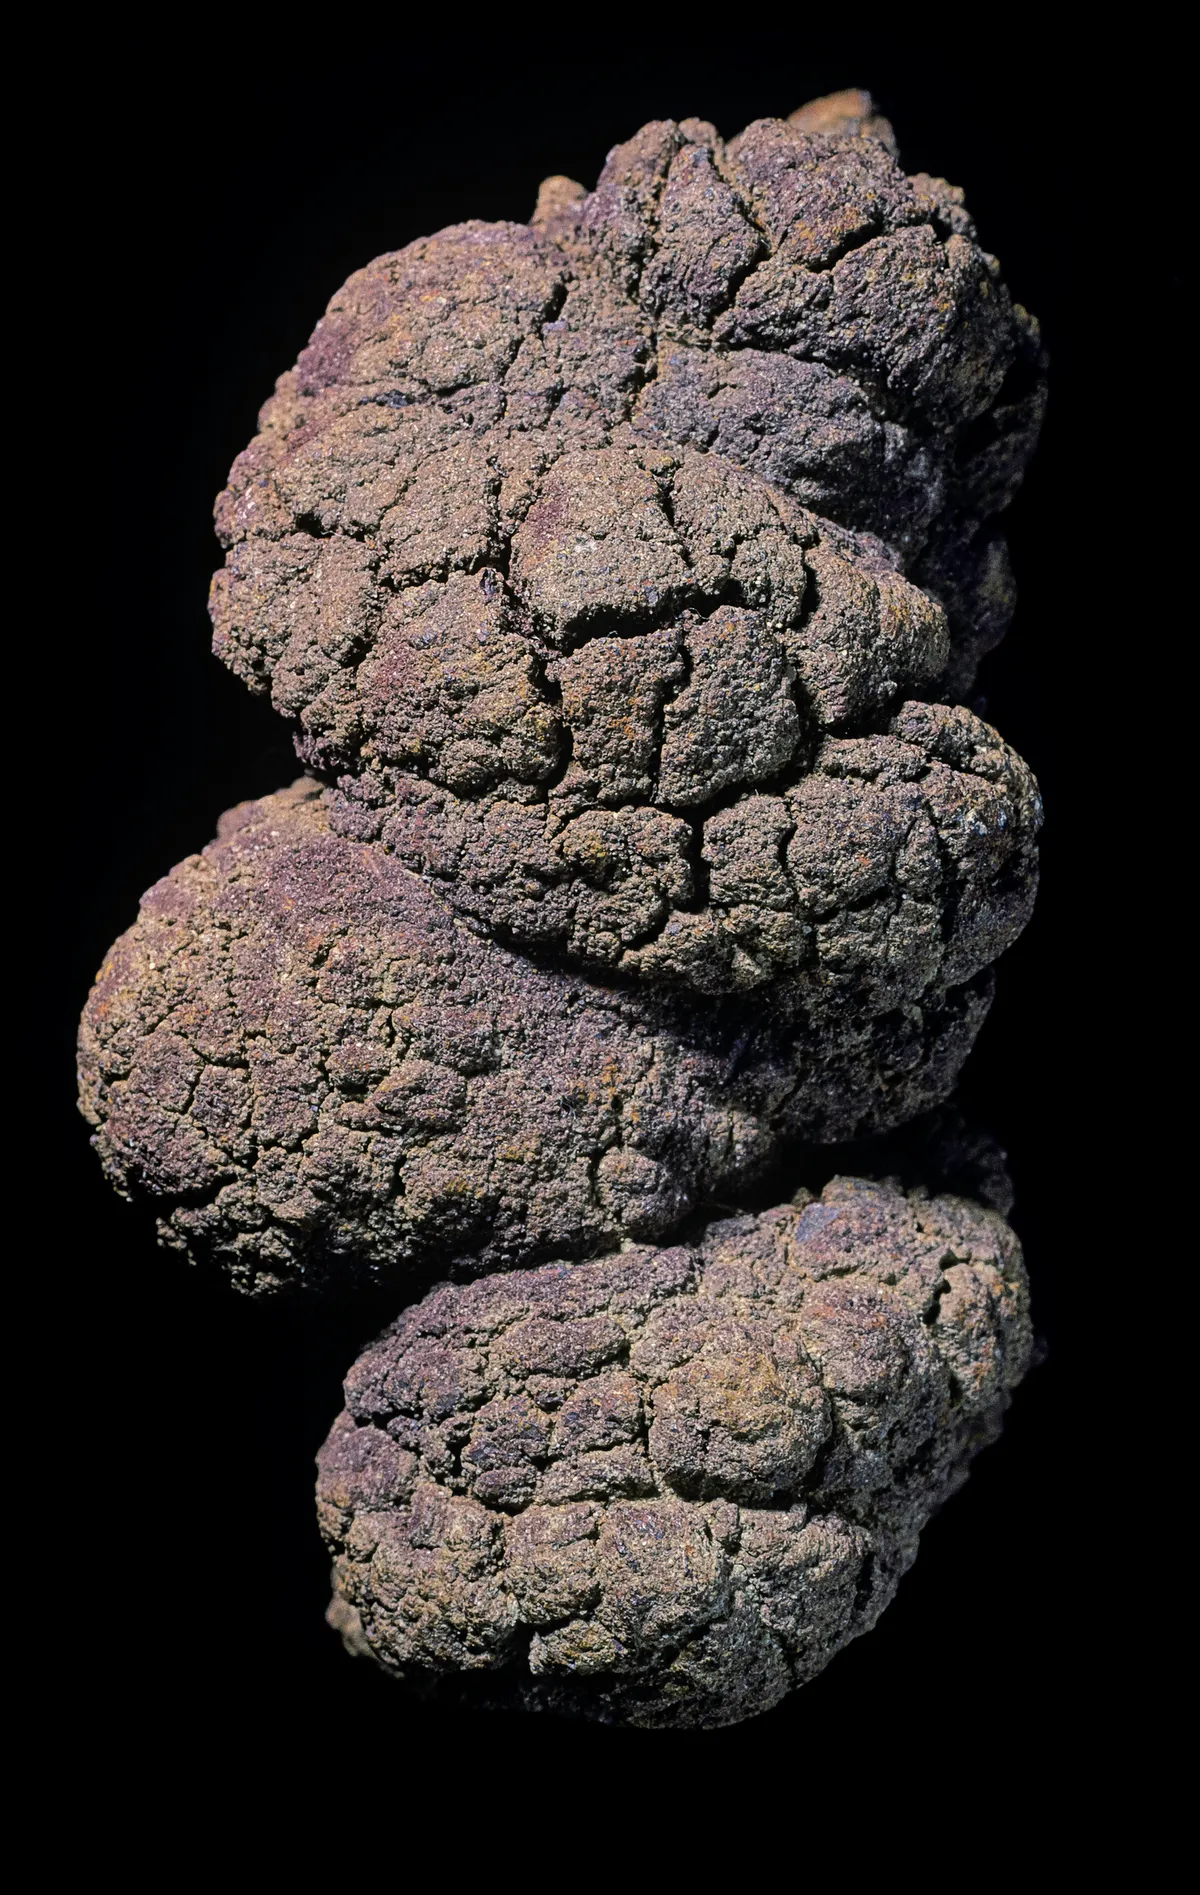 Fossilised dung, called a coprolite.